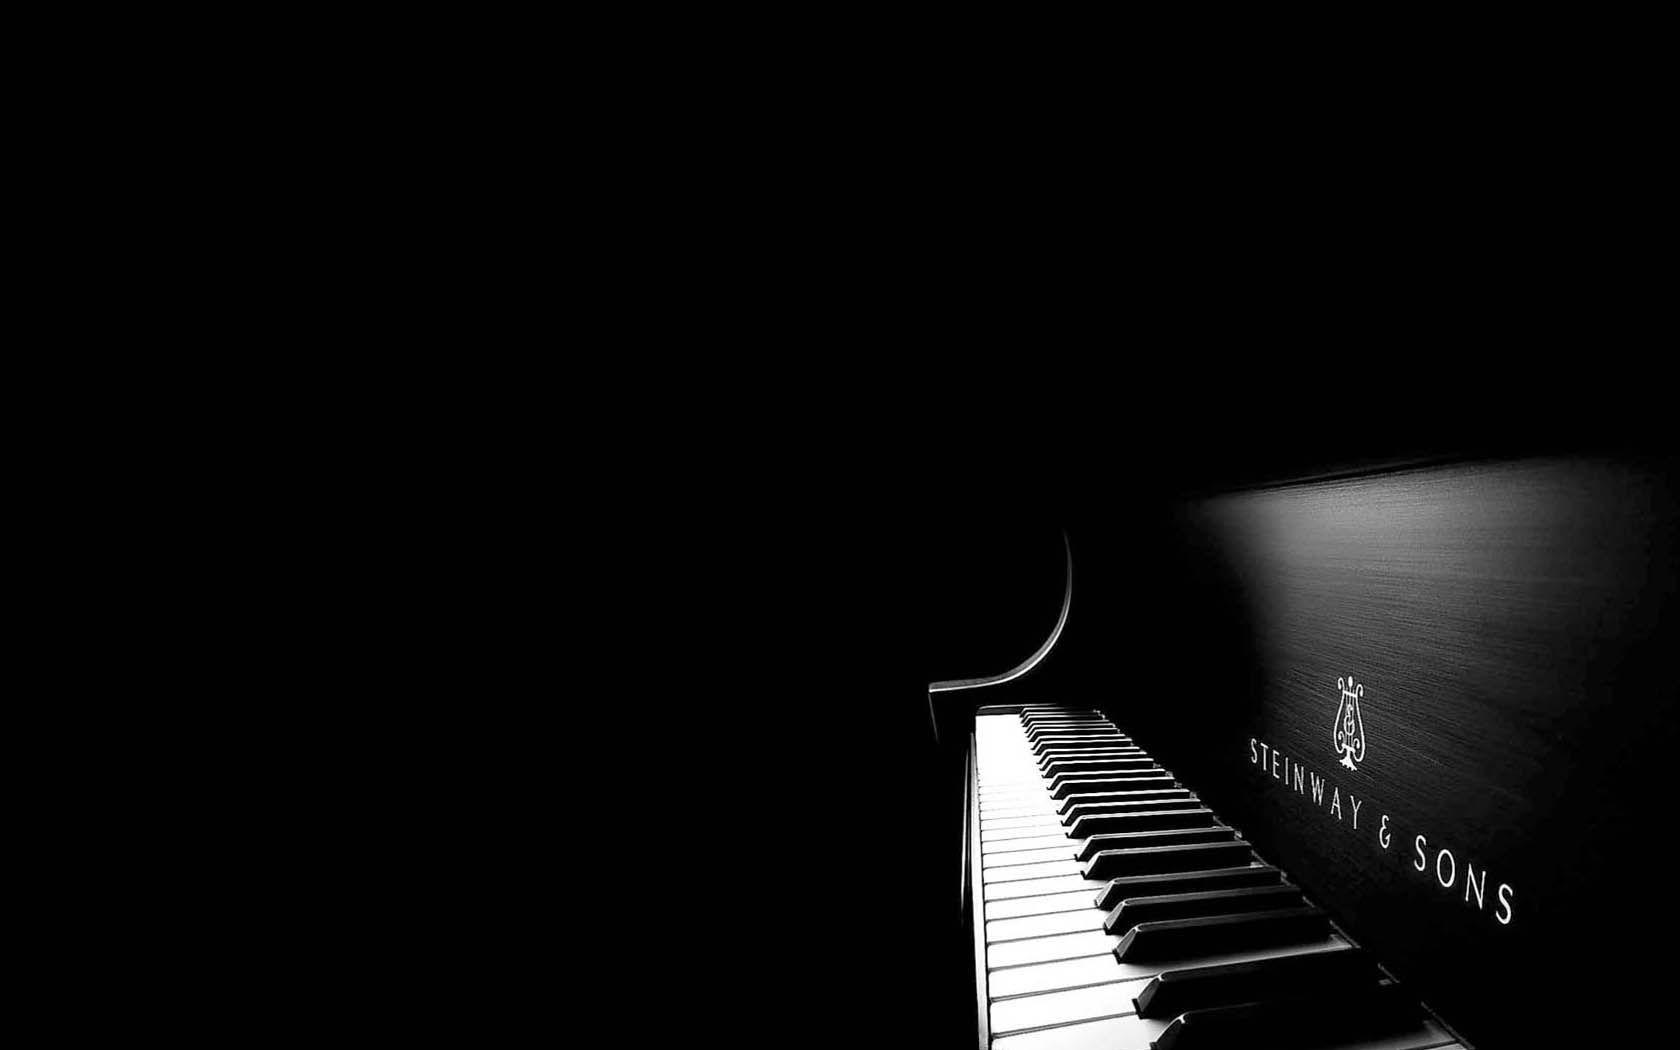 Steinway & Sons Wallpaper and Background Imagex1050